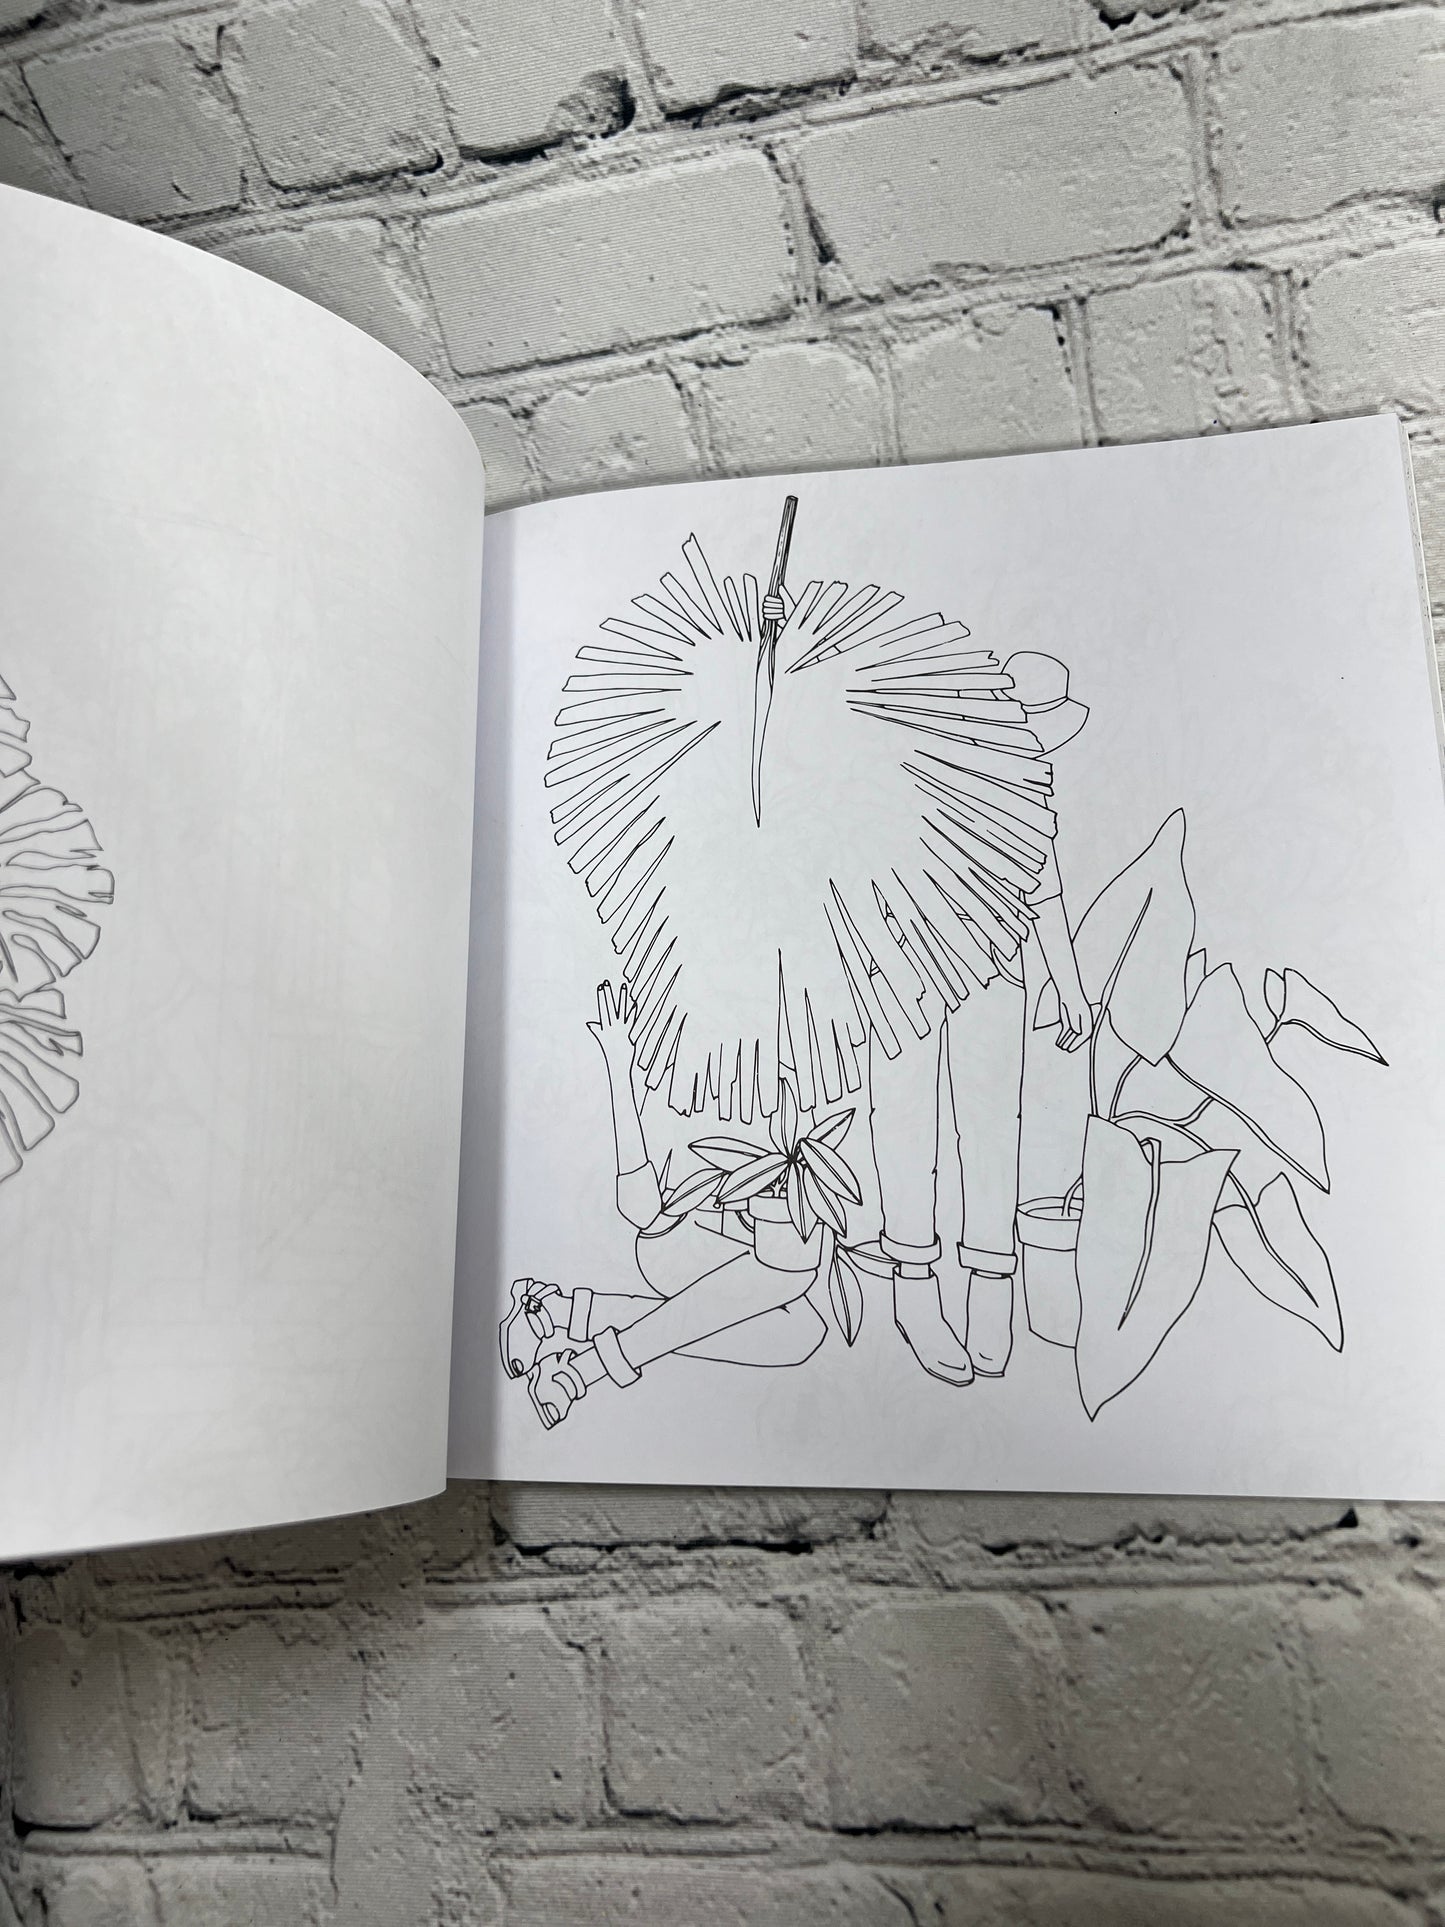 The Plant Lady: A Floral Coloring Book with Succulents and Flowers By Sara Simon